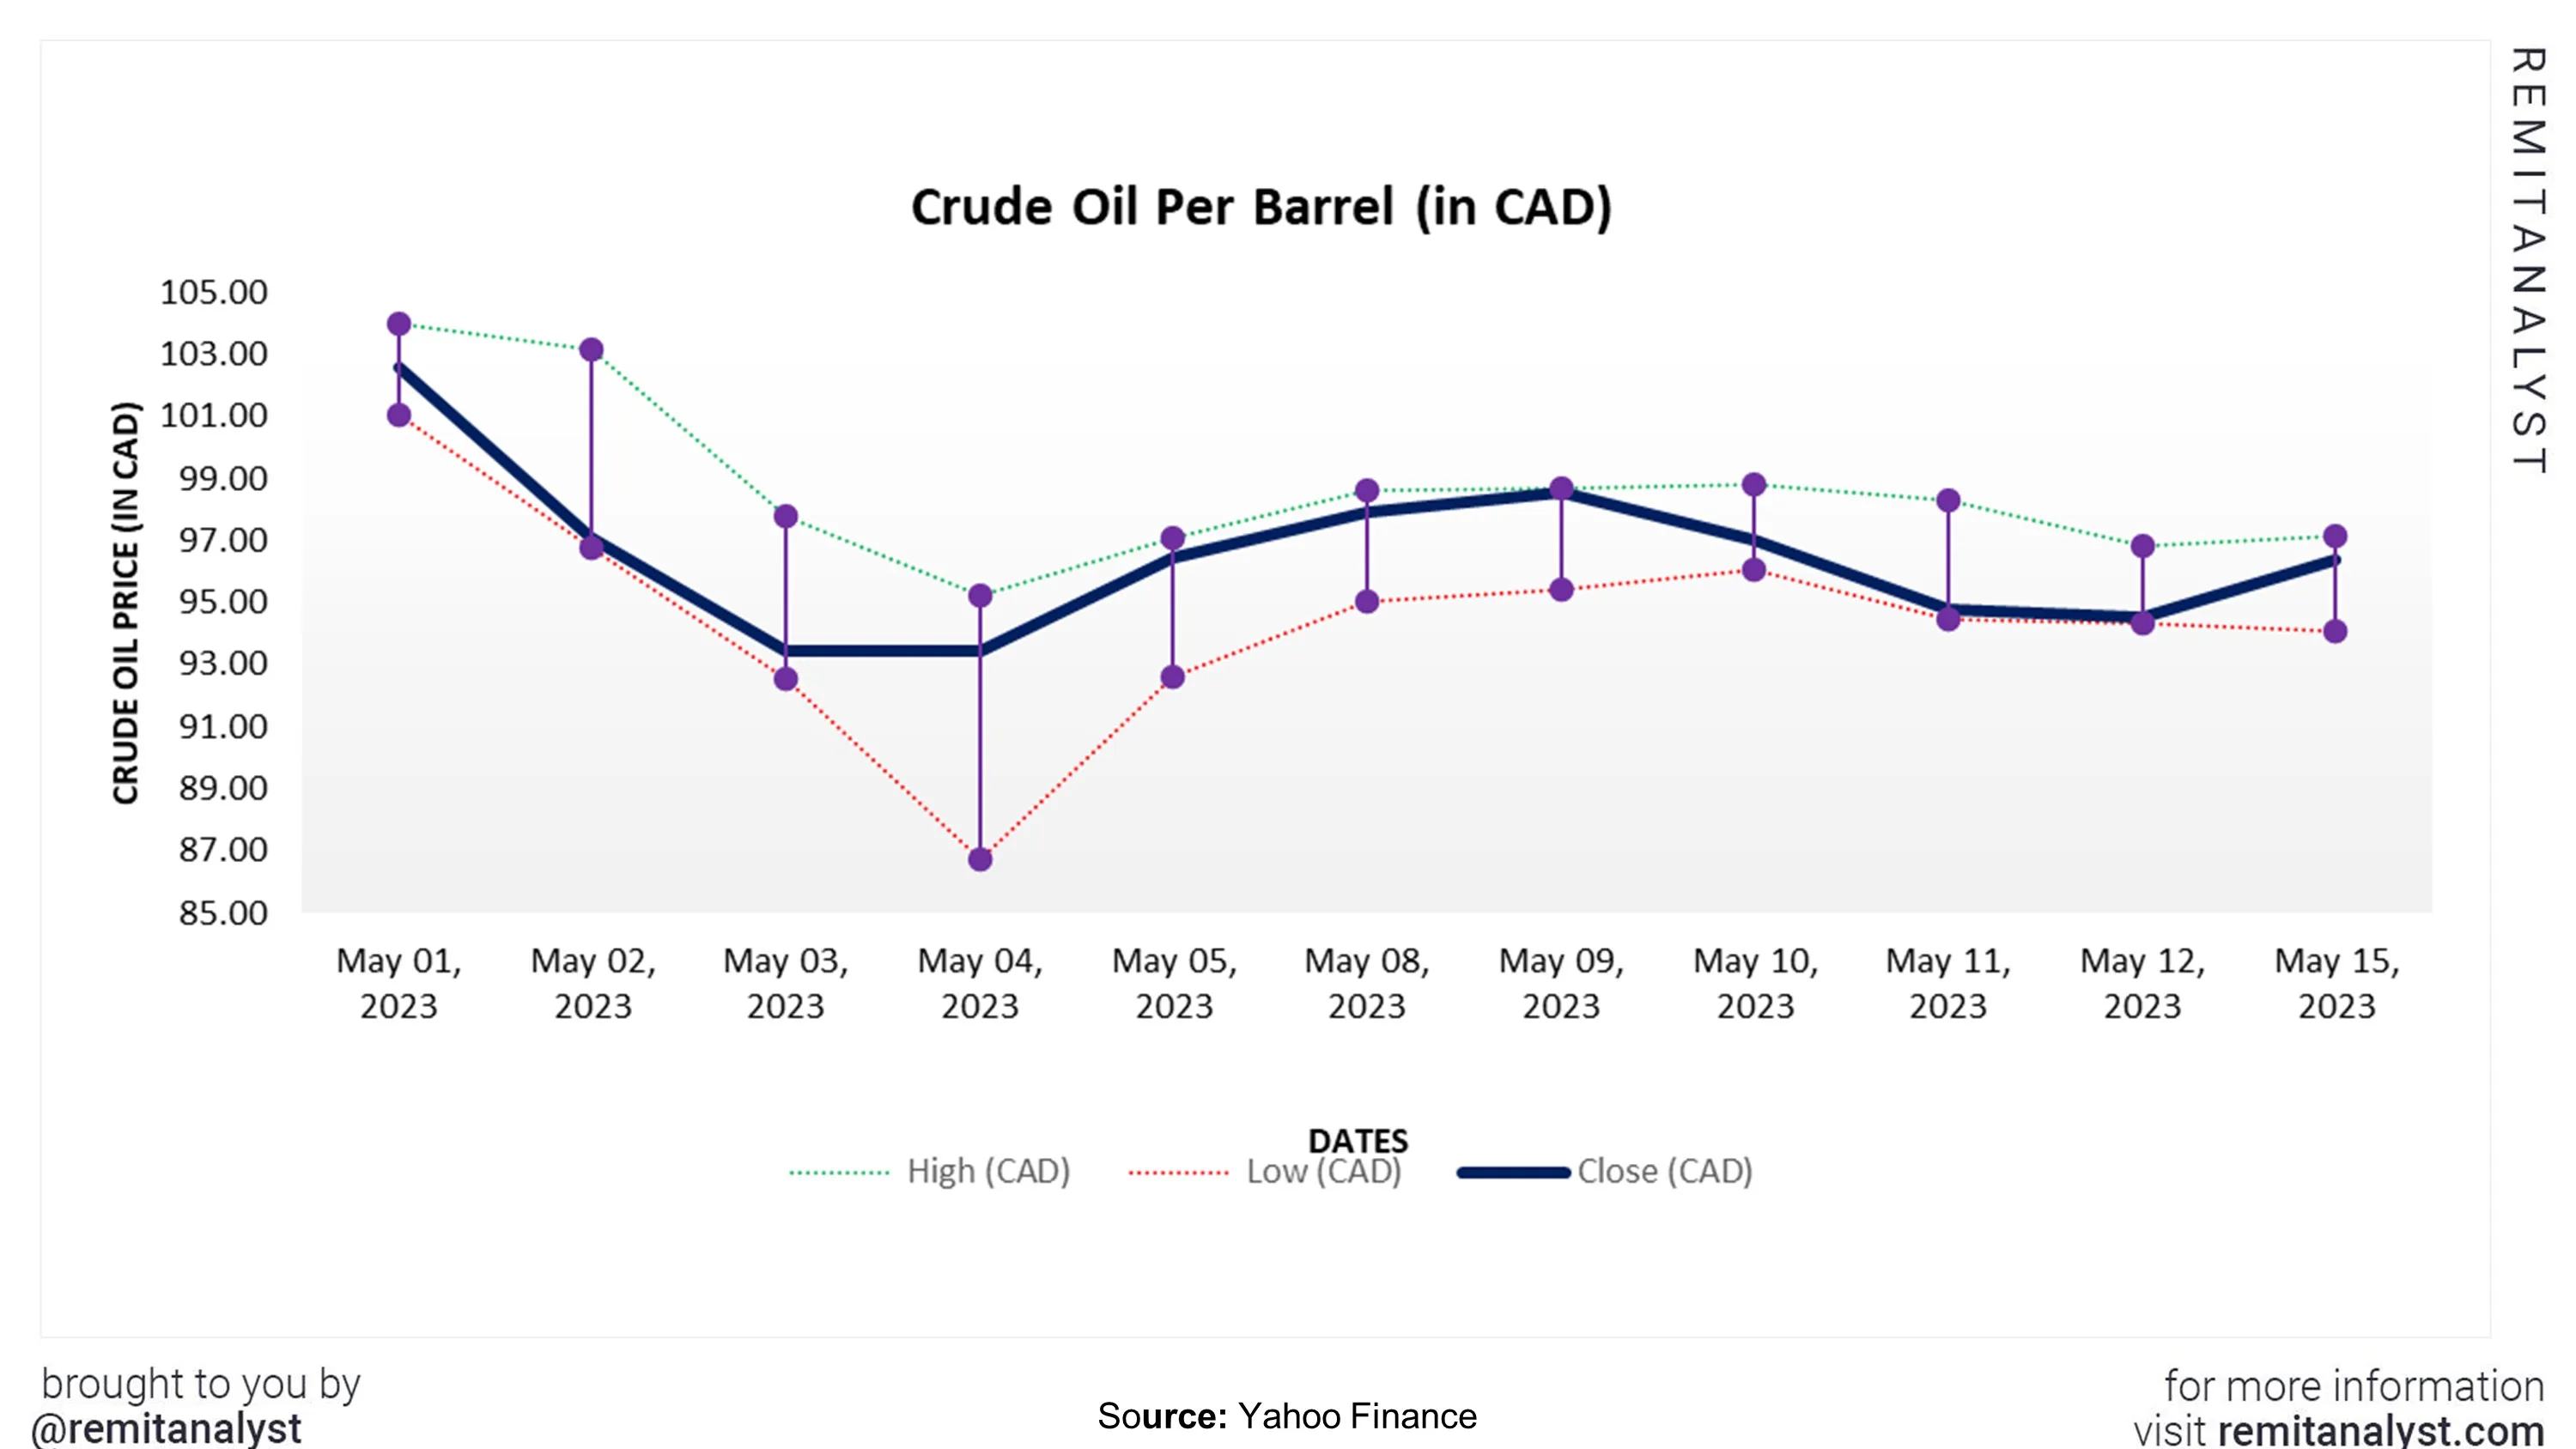 crude-oil-prices-canada-from-1-may-2023-to-15-may-2023